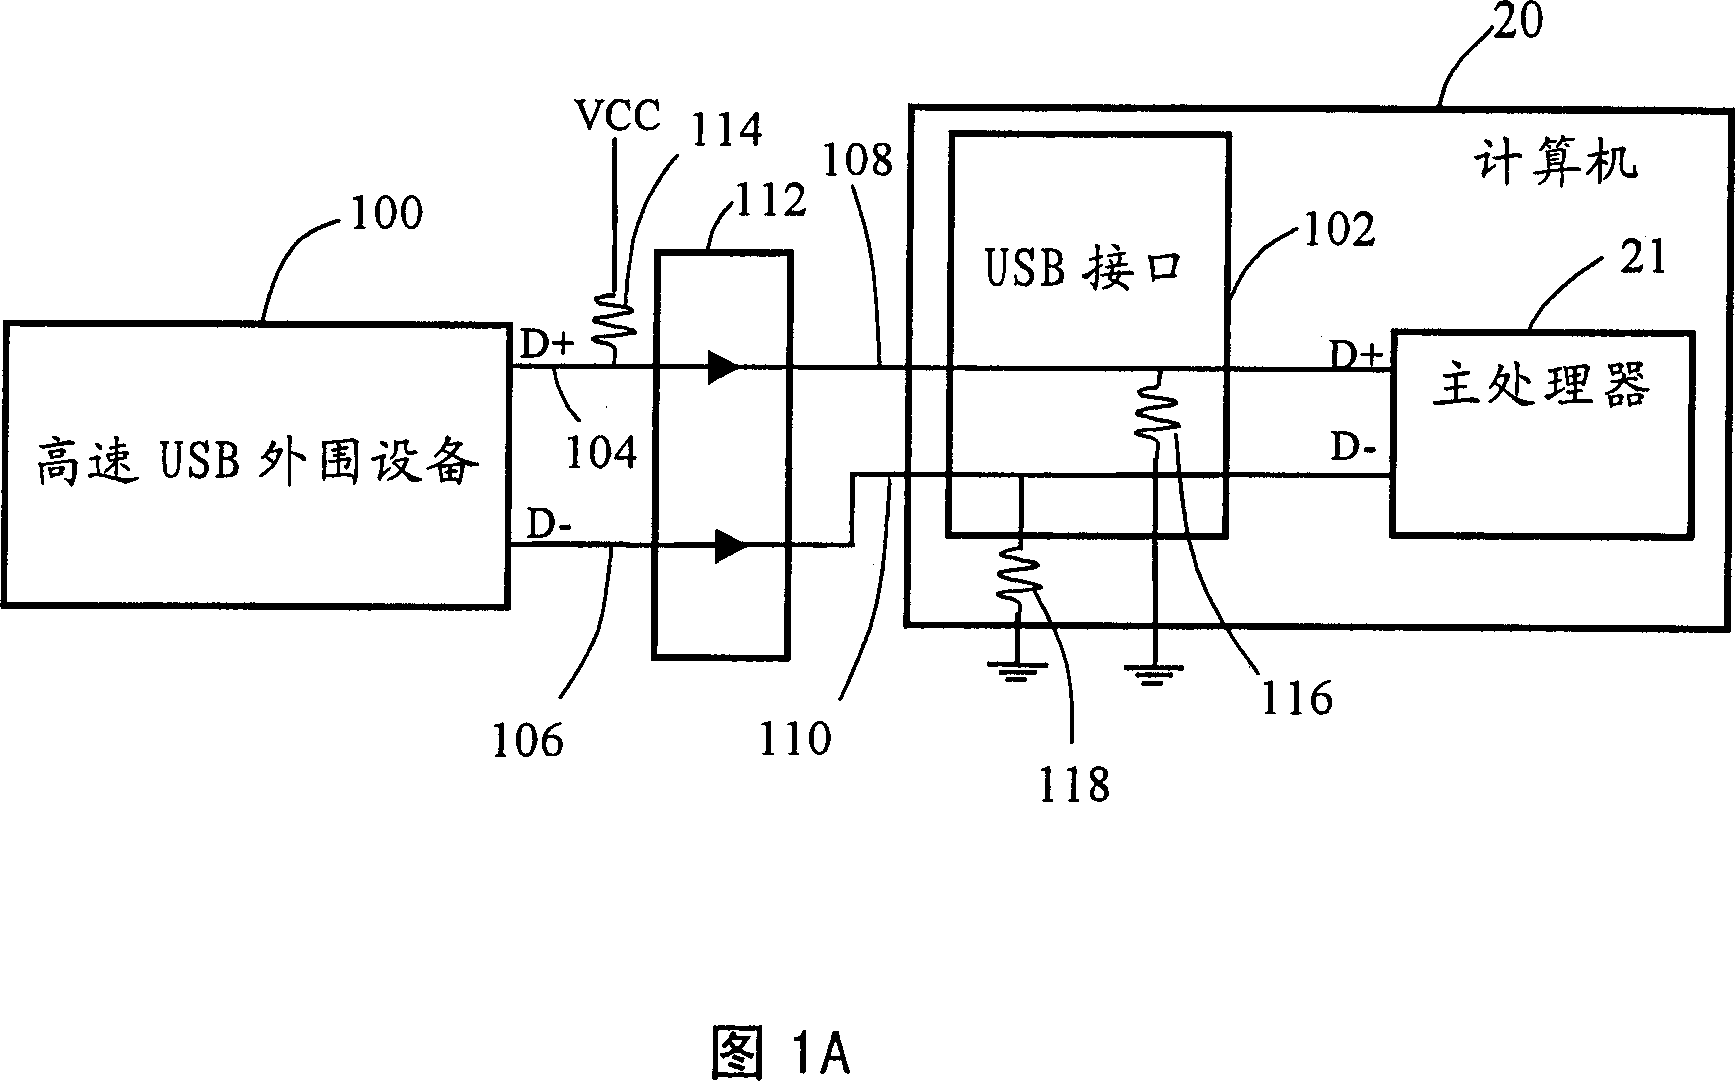 Automatic method for identifying signal interfaces of electronic equipment